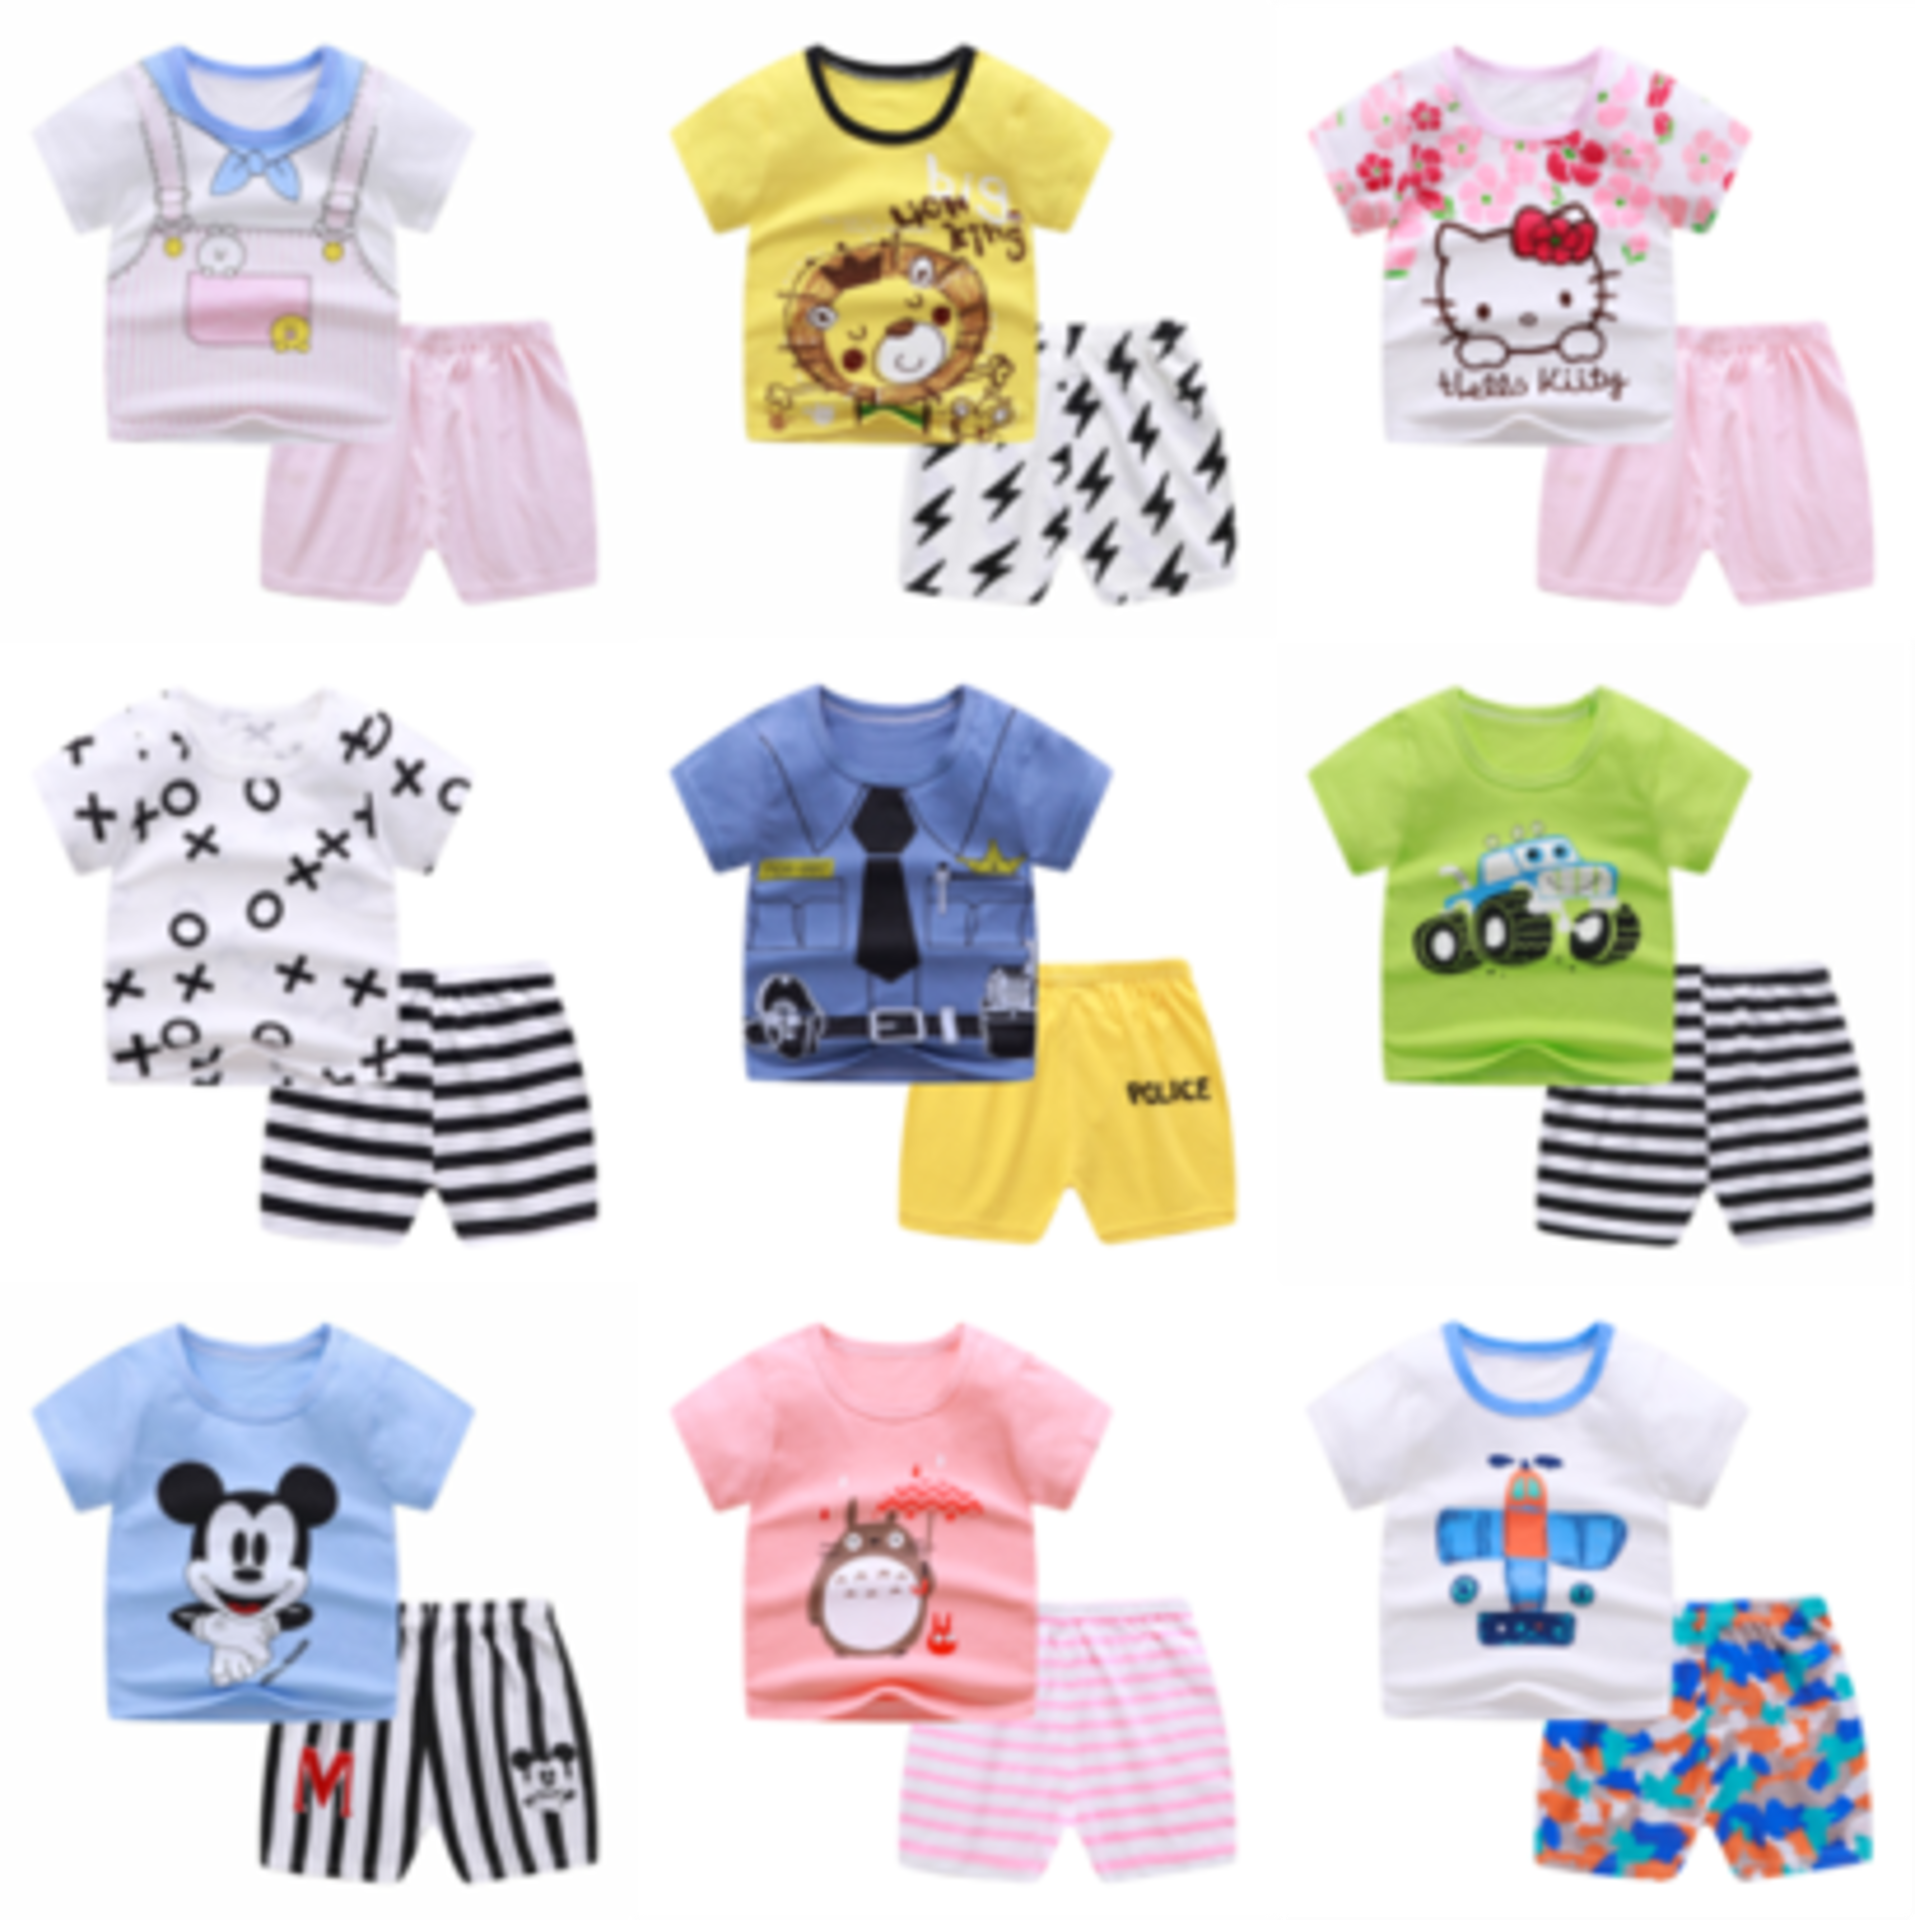 (NO VAT) 11 X BRAND NEW BABIES PJ SET WHALE DESIGN VARIOUS SIZES FROM 6 MONTHS TO 4 YEARS - S1